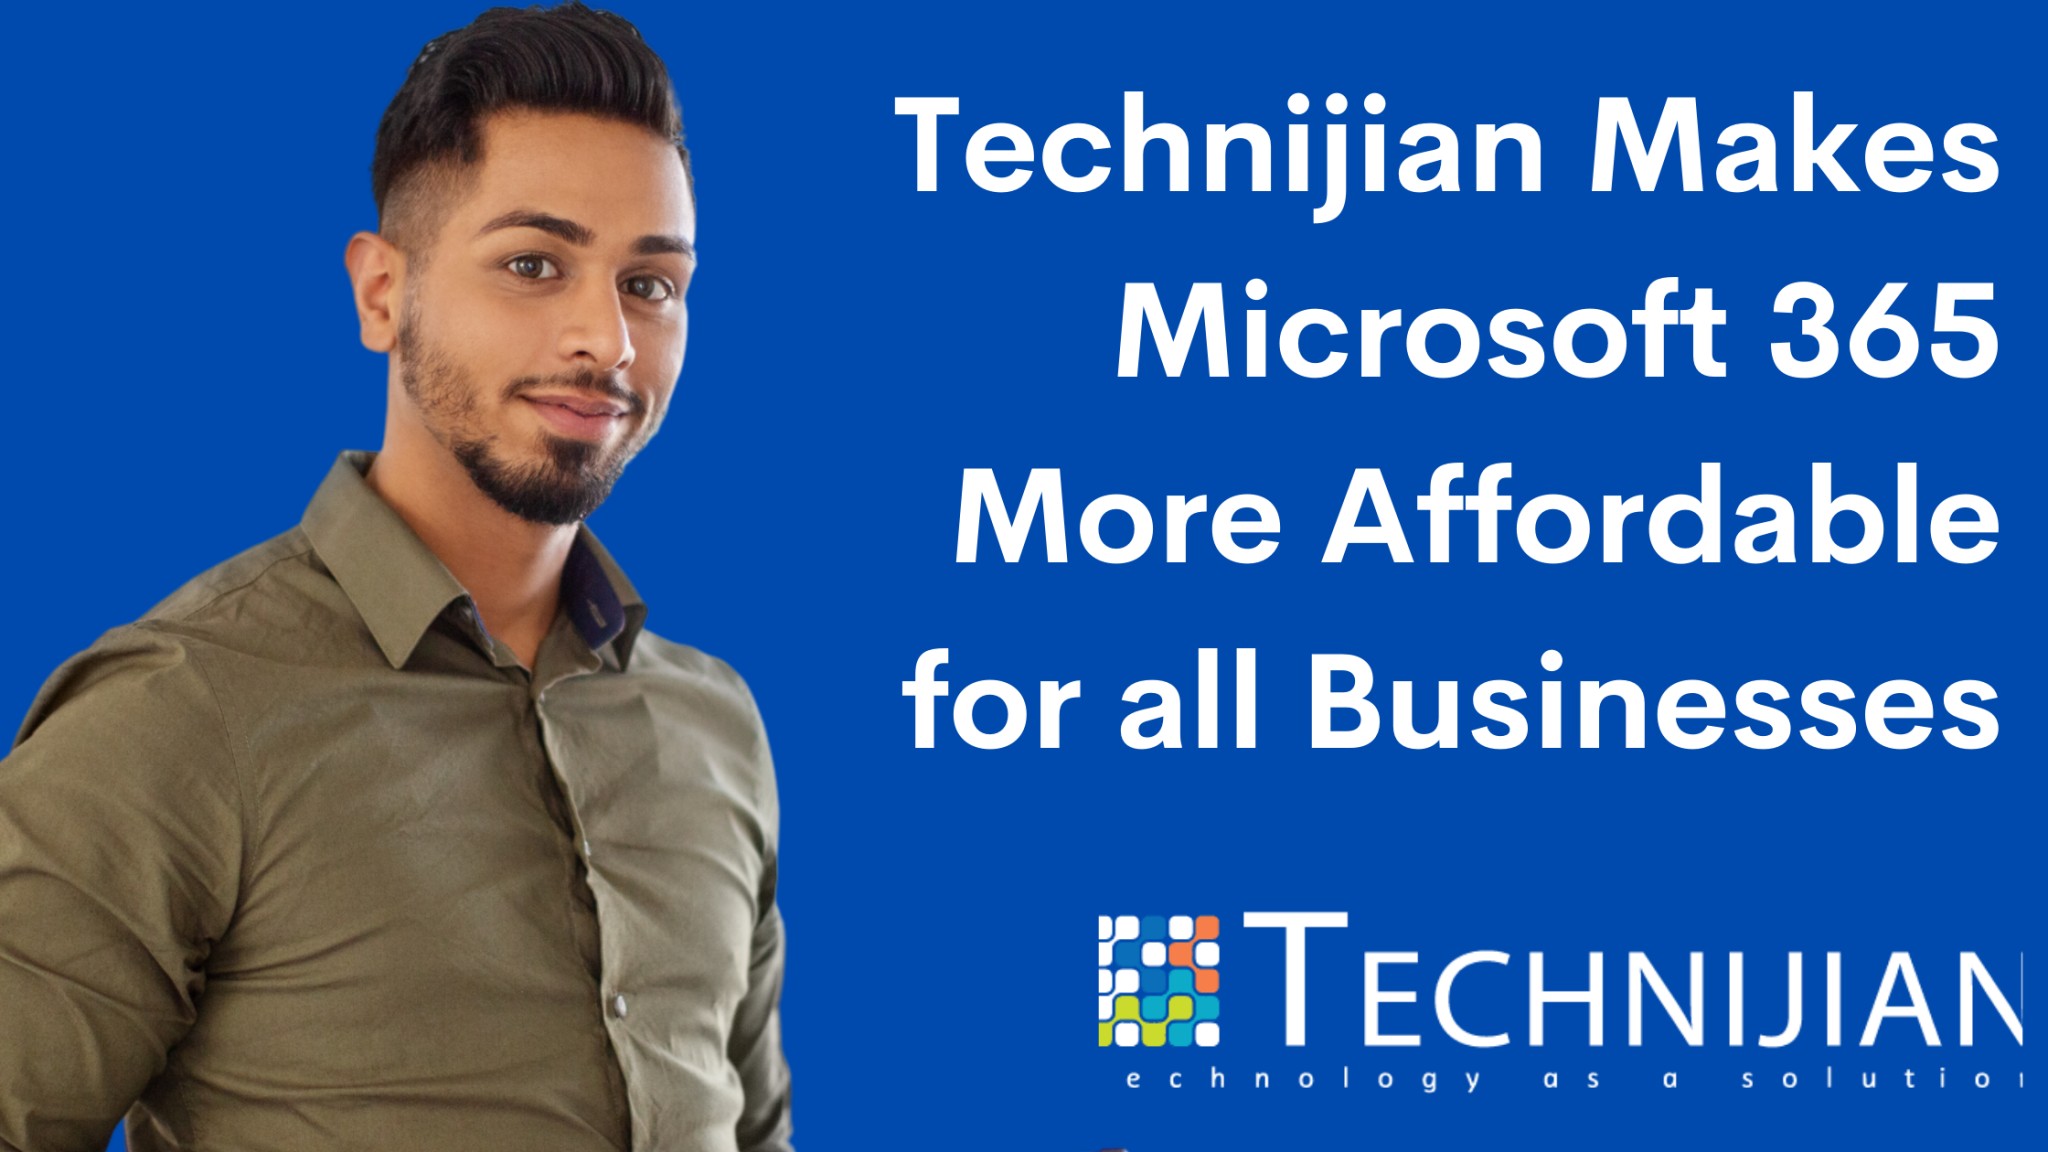 Technijian Makes Microsoft 365 More Affordable for all Businesses